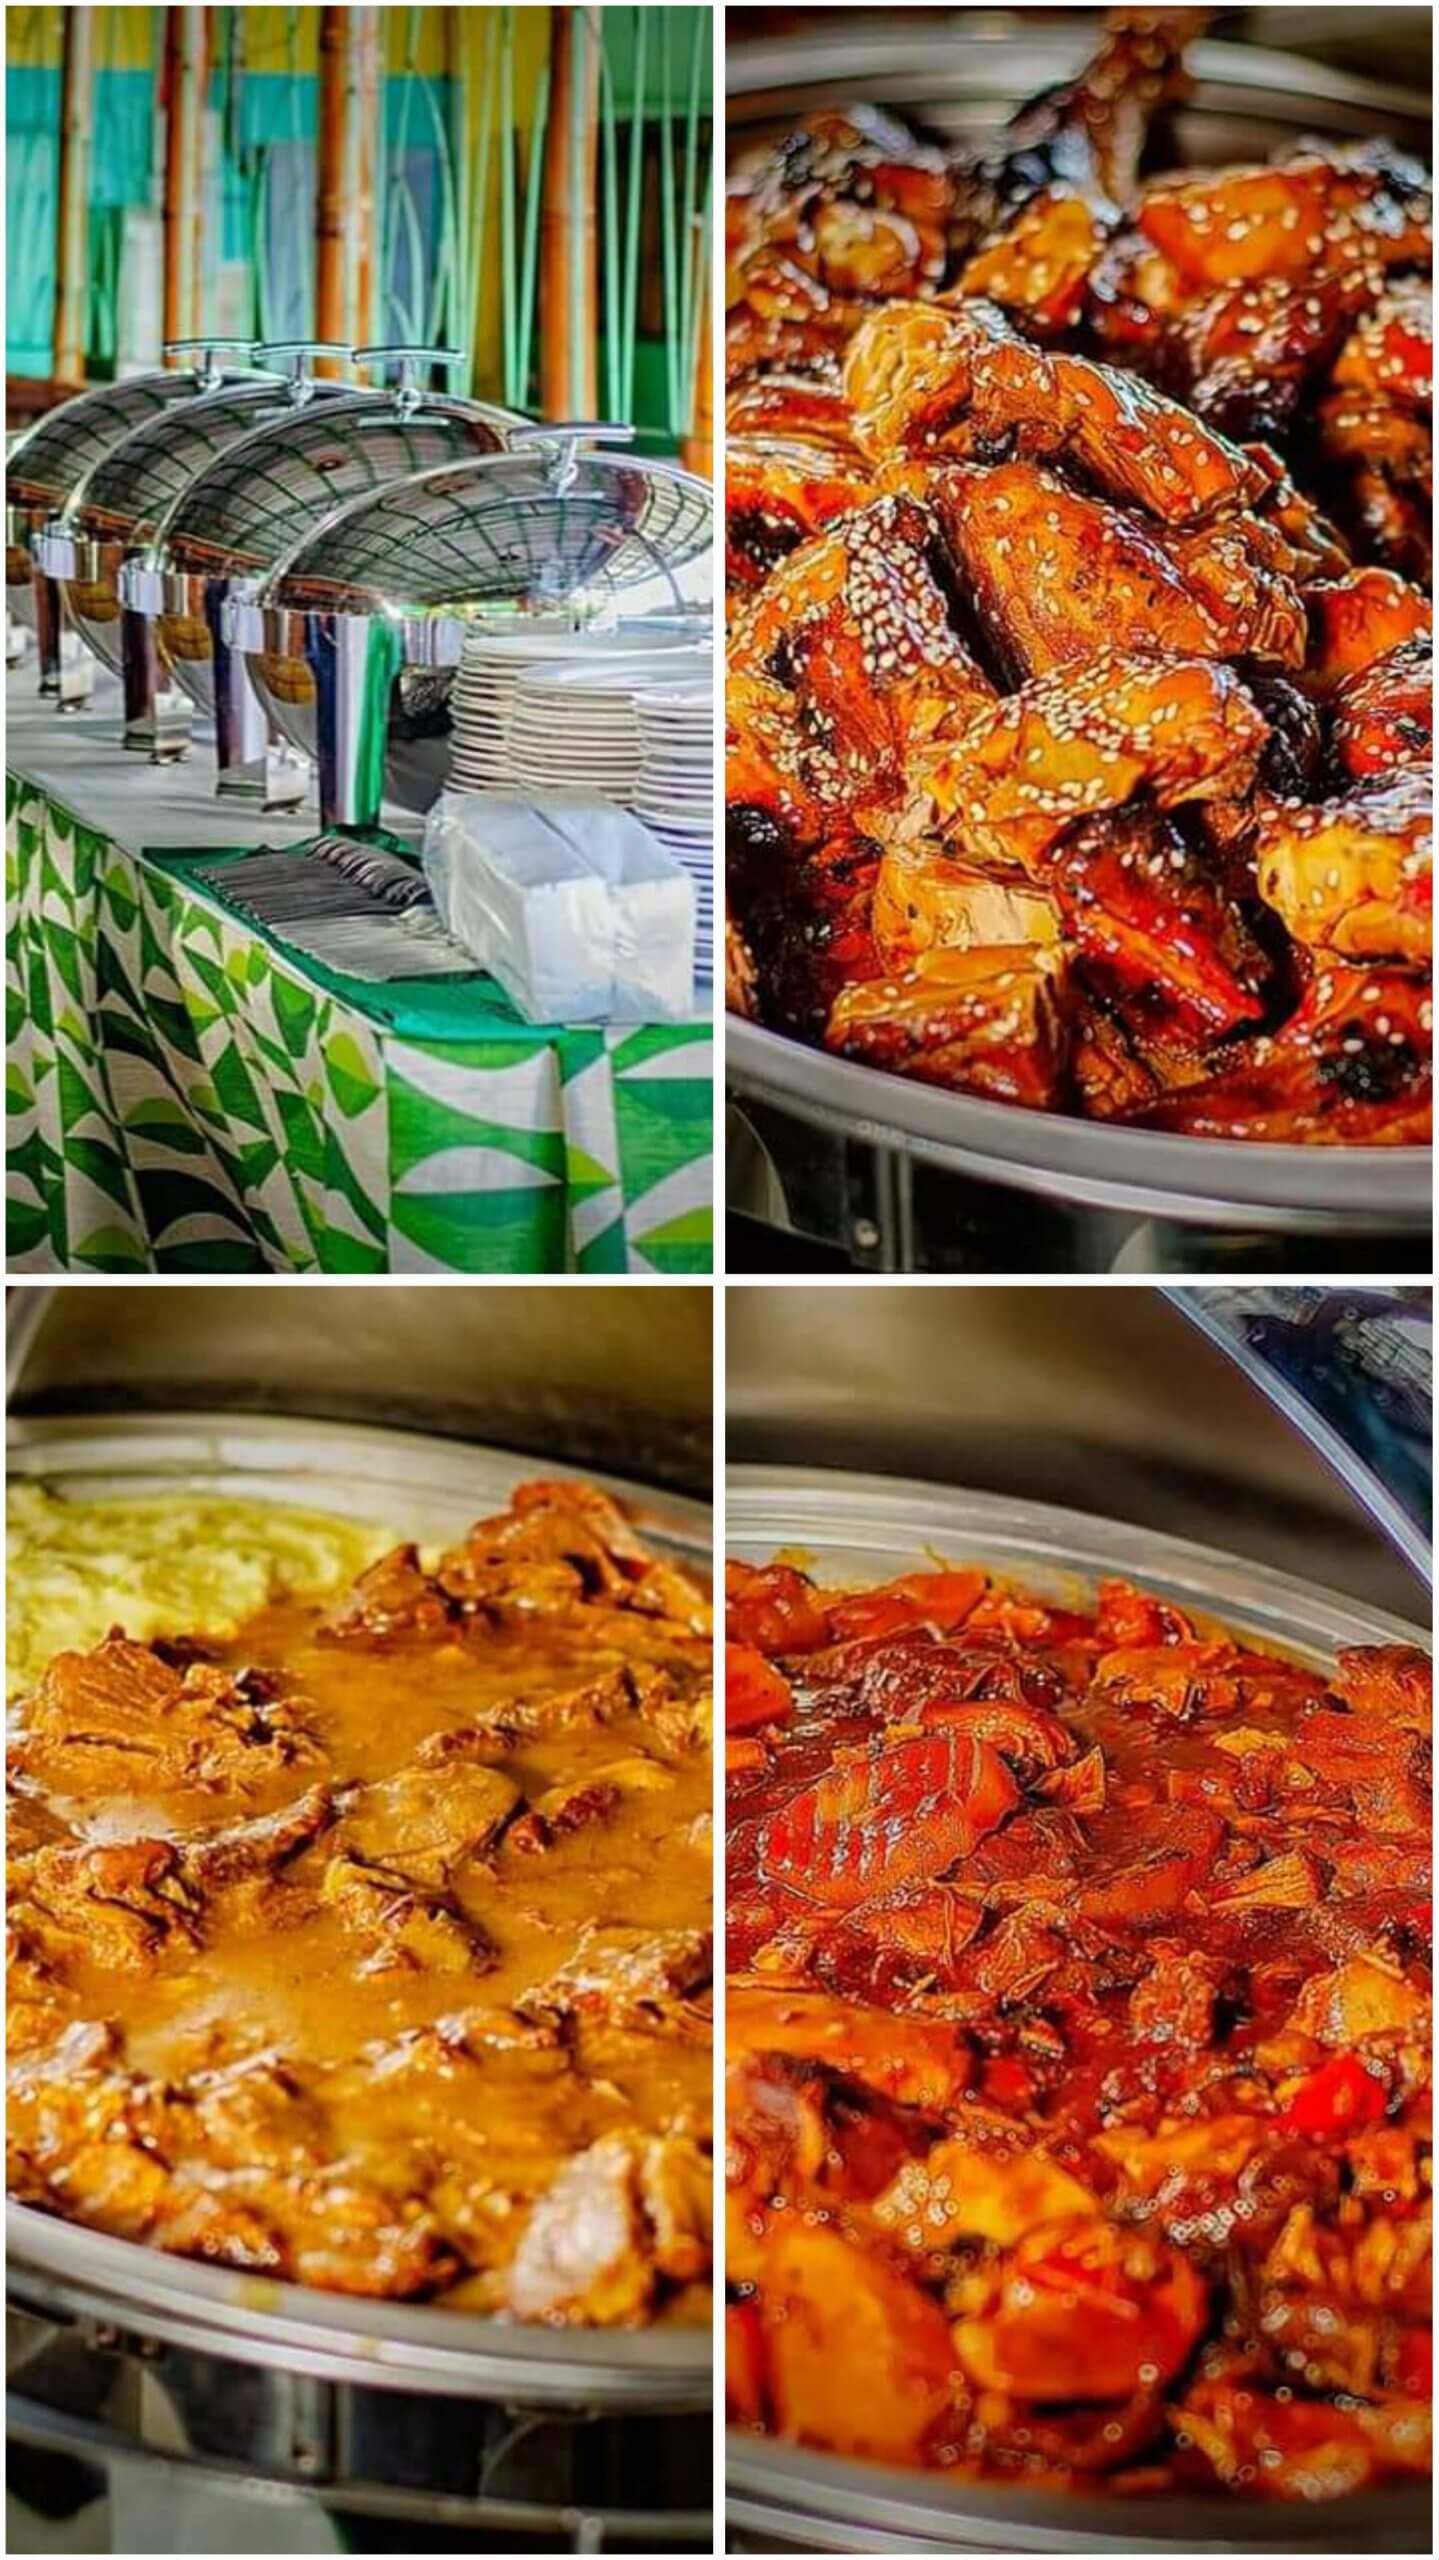 catering services in angeles city pampanga